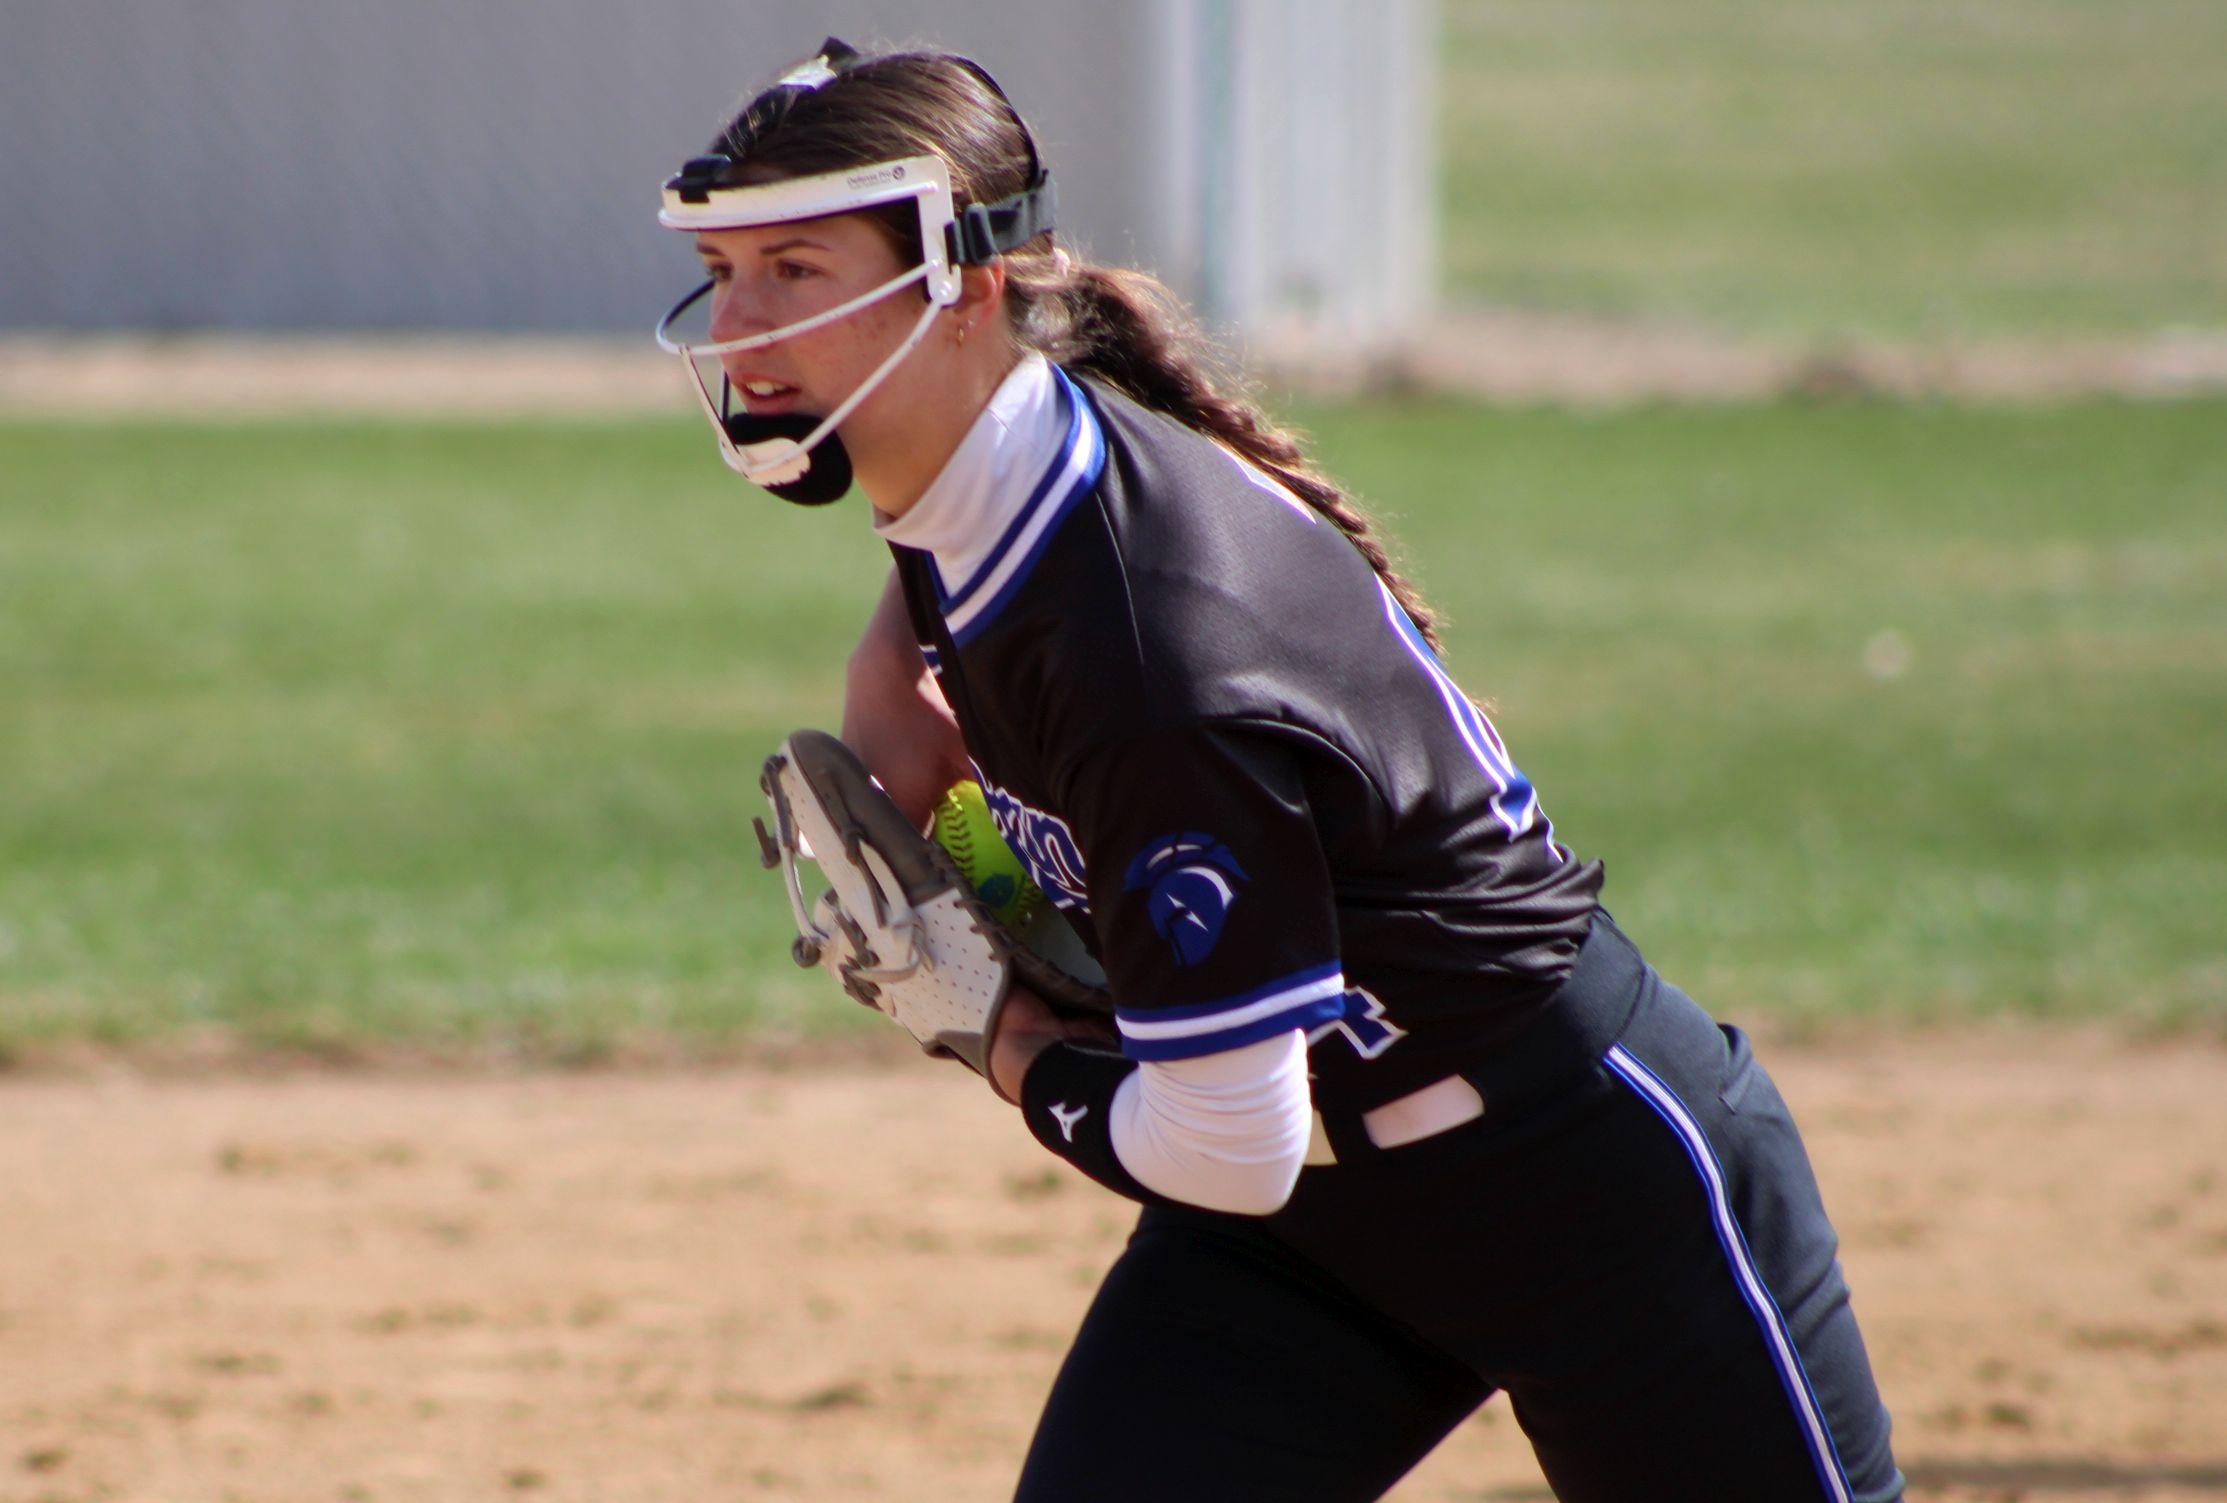 NIACC's Izzy Sloan was selected as the ICCAC pitcher of the week for the week of April 1-7.